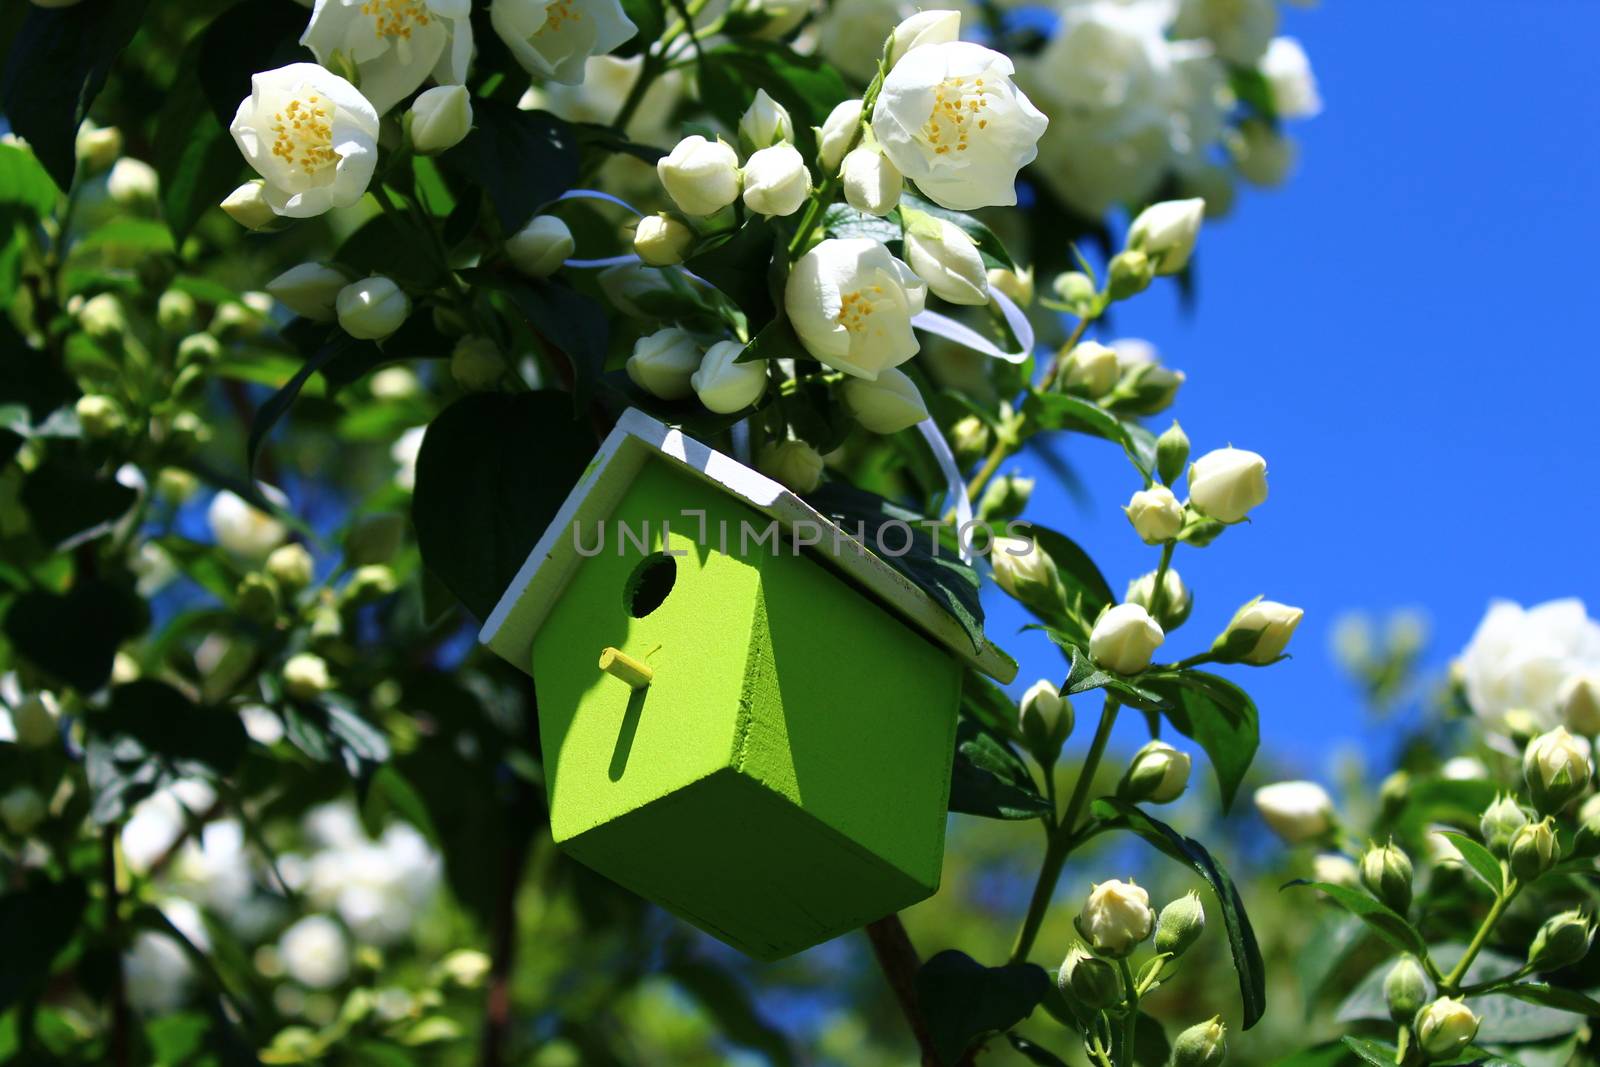 The picture shows a birdhouse in the jasmine in the garden.